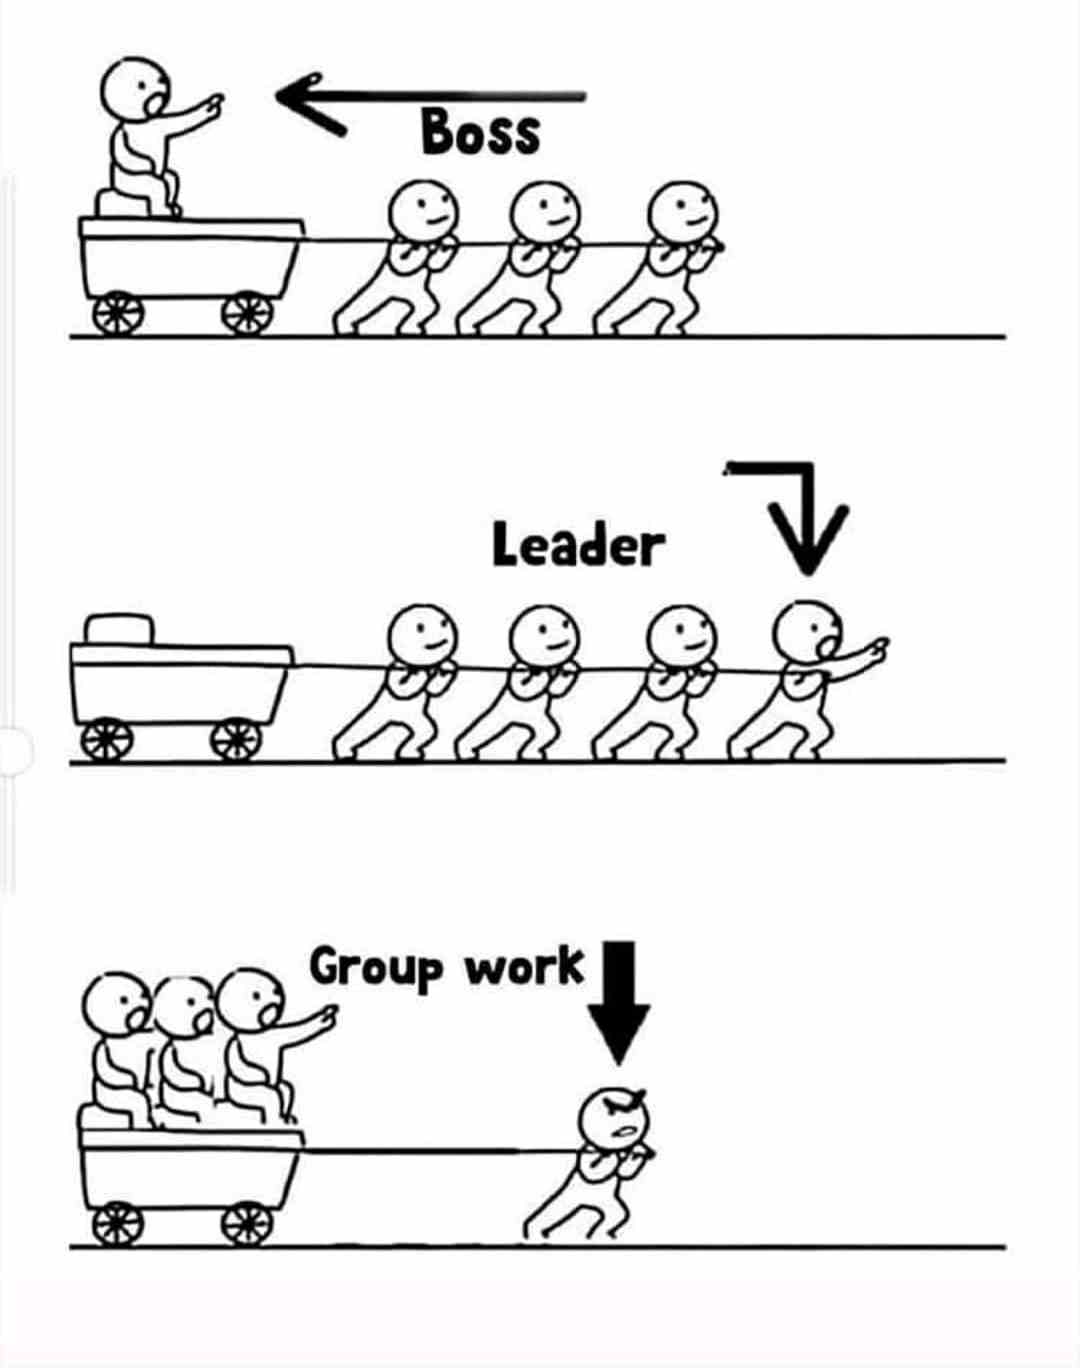 Boss Leader and Group work